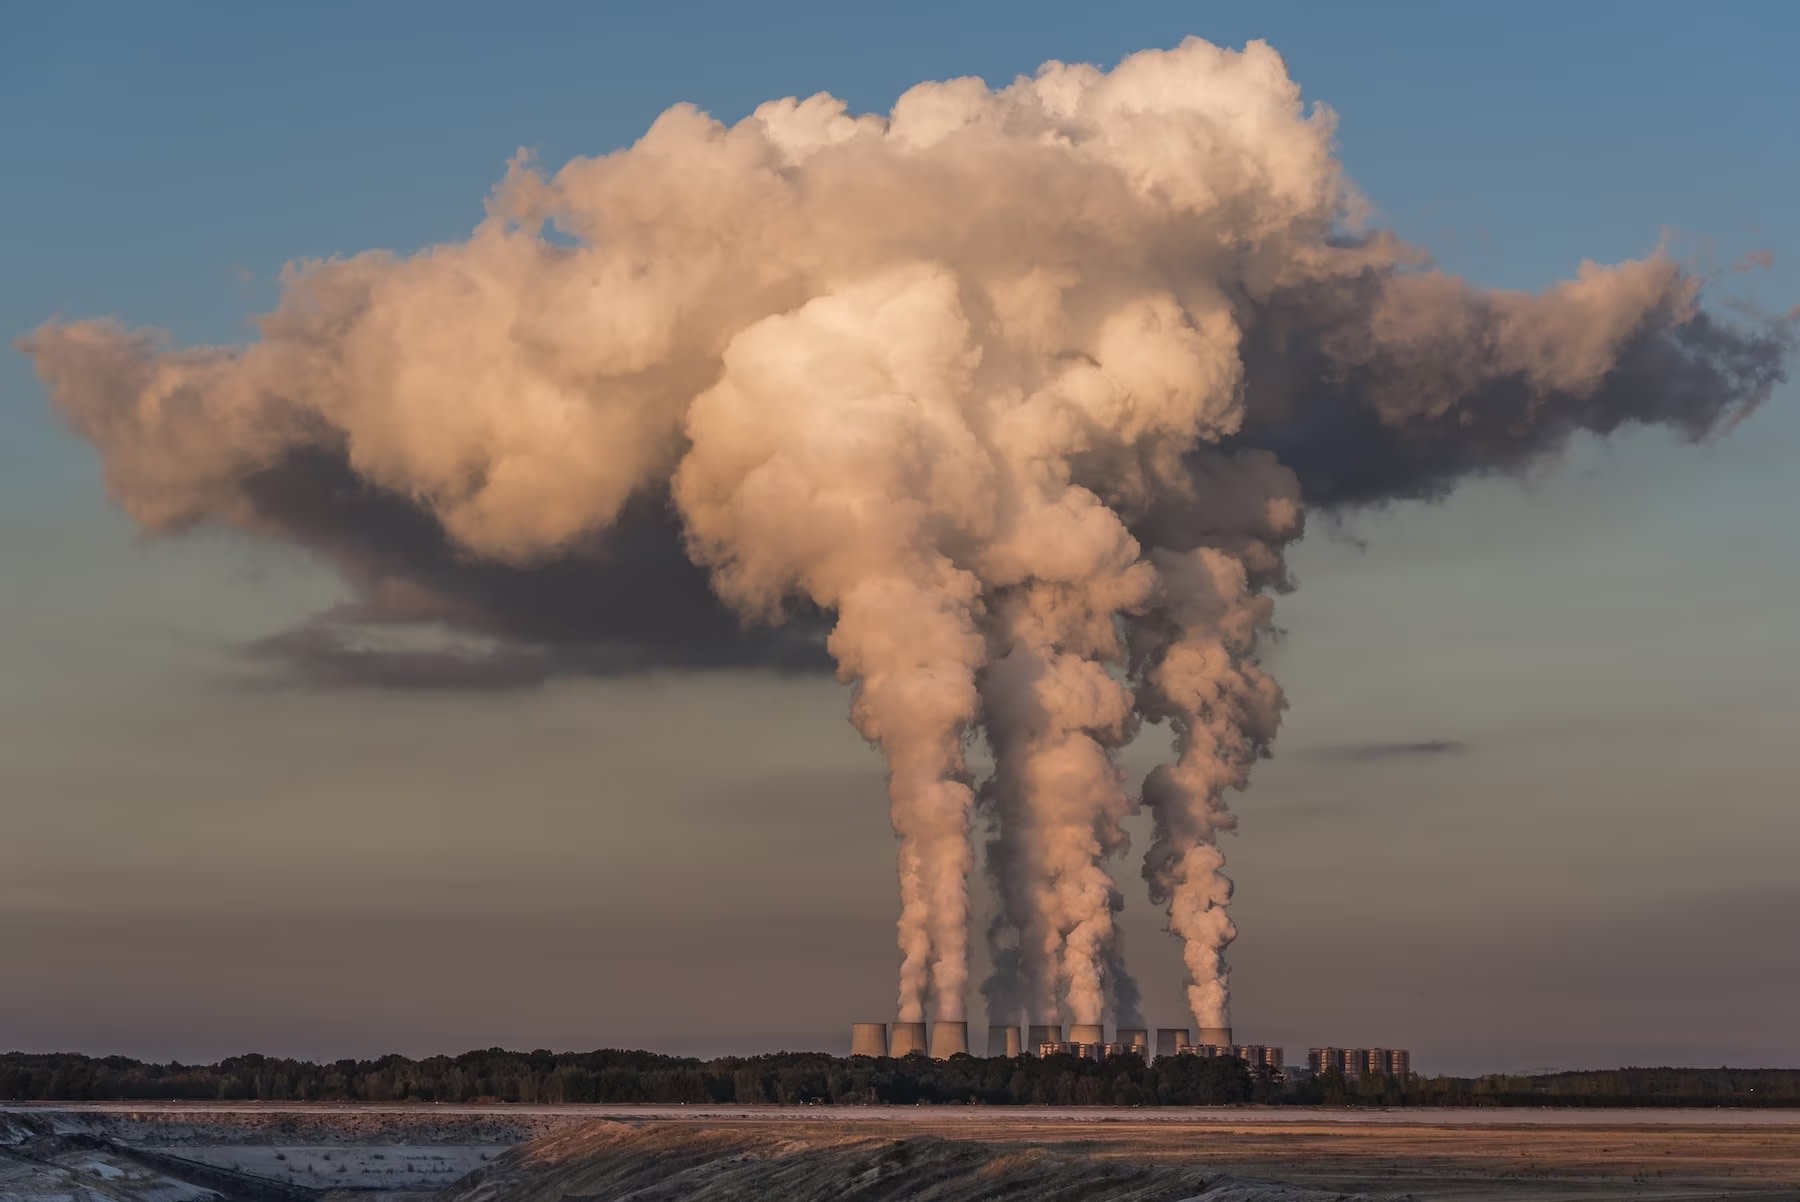 Image of visible emissions from coal-fired power station